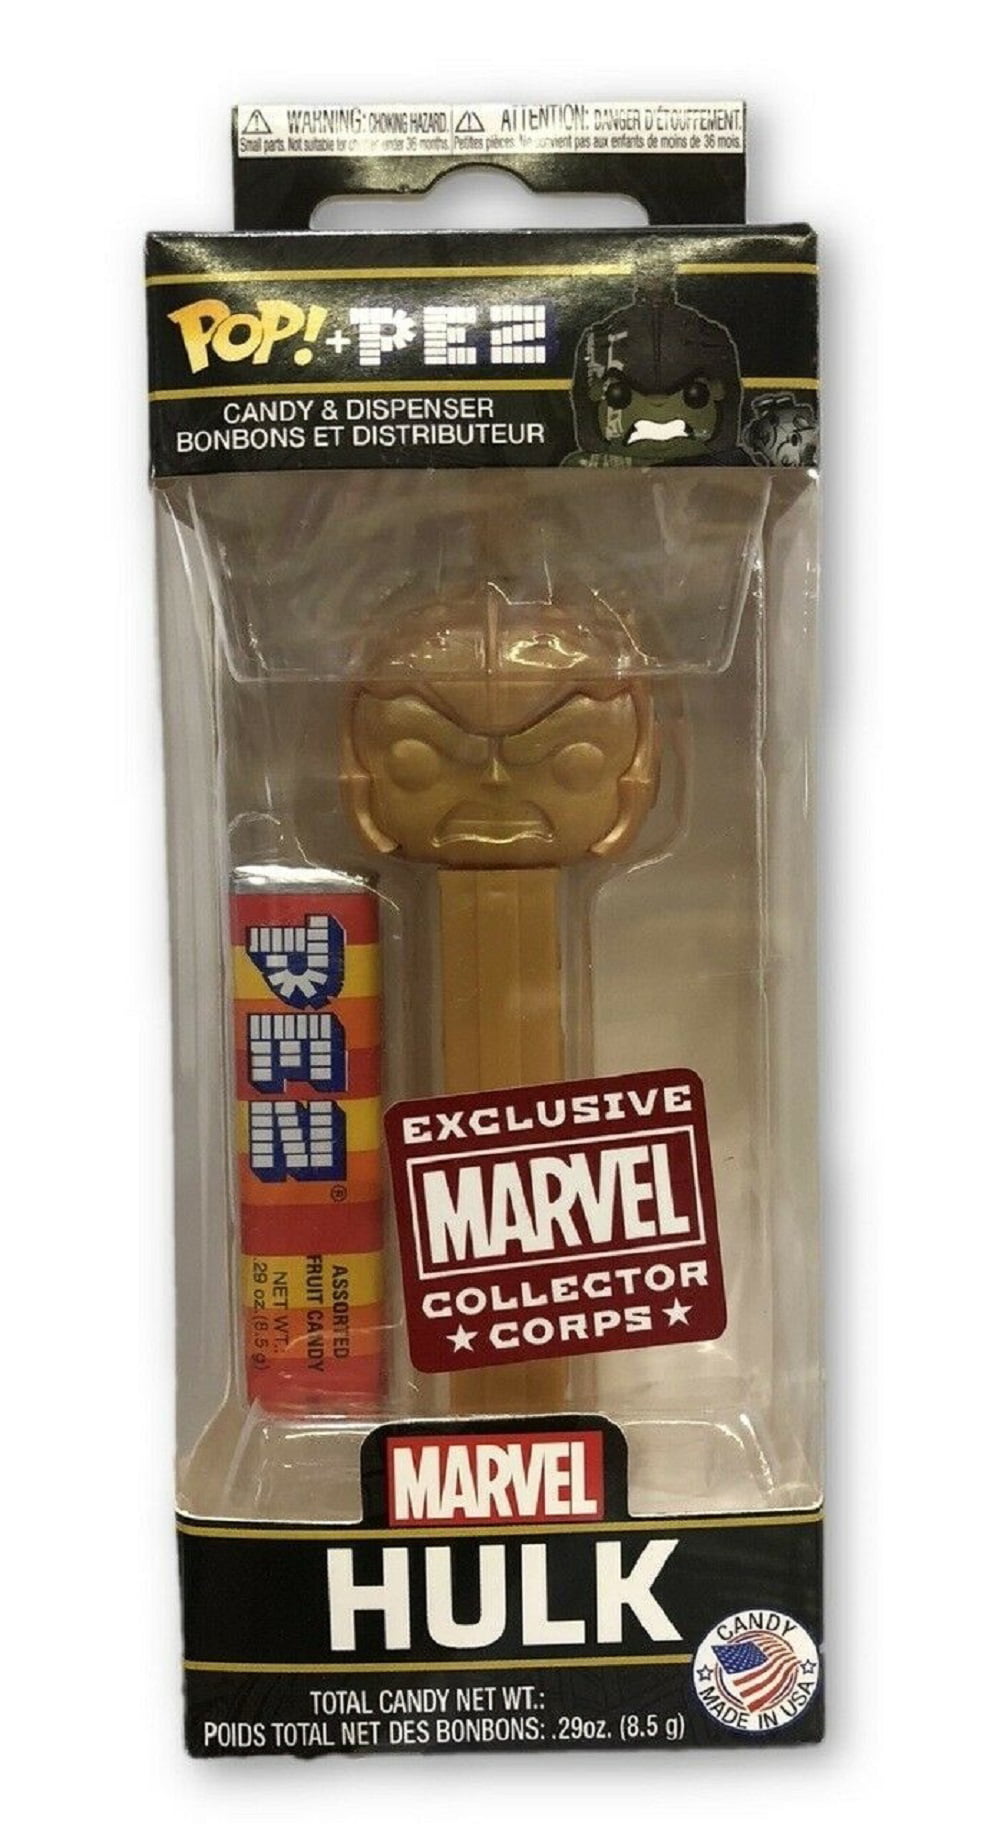 NEW Pop Pez Hulk Candy & Dispenser Marvel Collector Corps Exclusive Gold Funko 